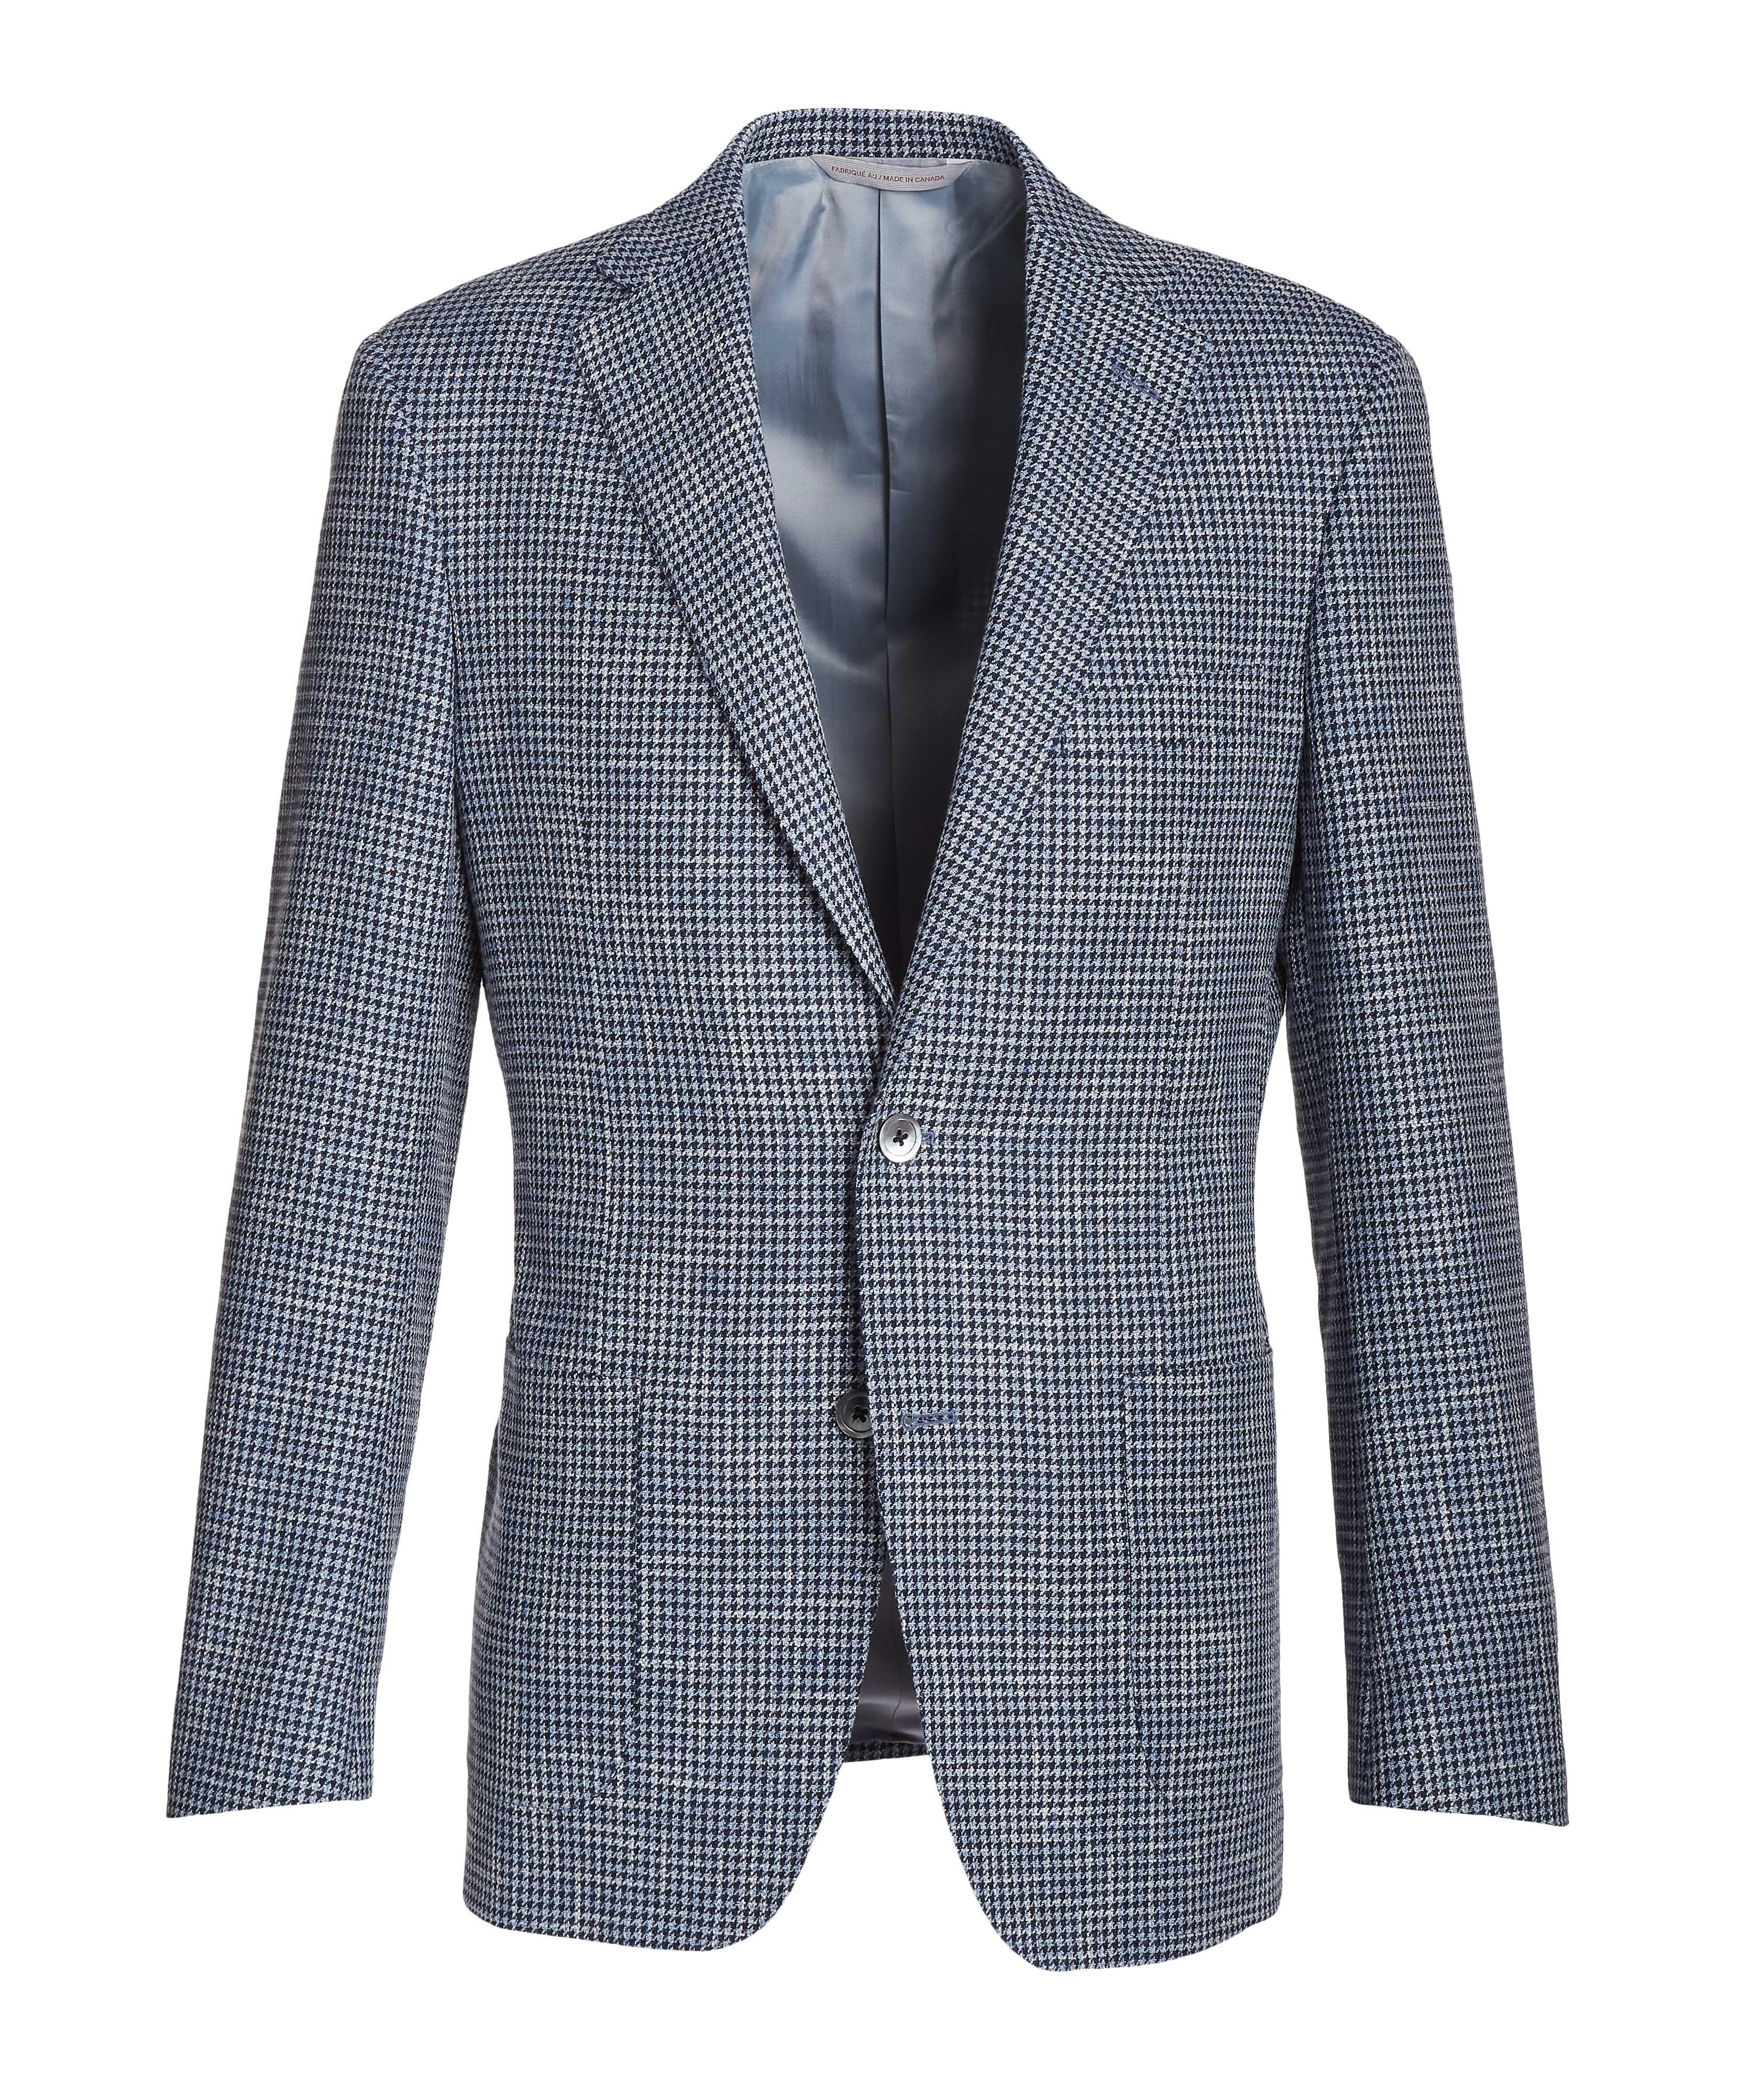 Cosmo Houndstooth Wool, Cotton & Linen Sport Jacket image 0